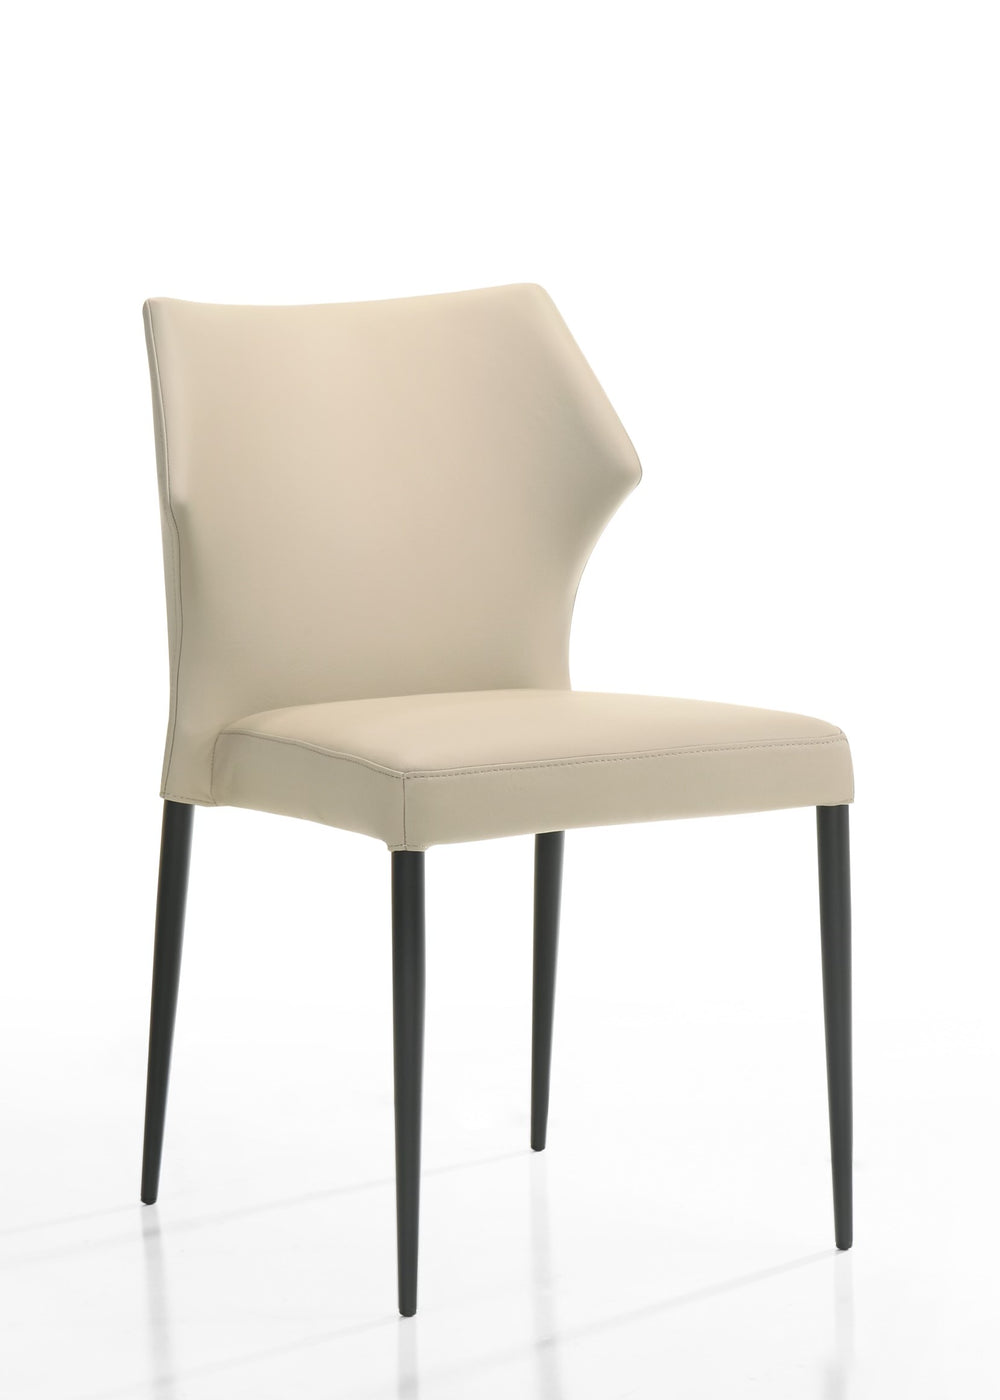 Luke Soft Leather chair sold in set of two - Atmosphere Interiors